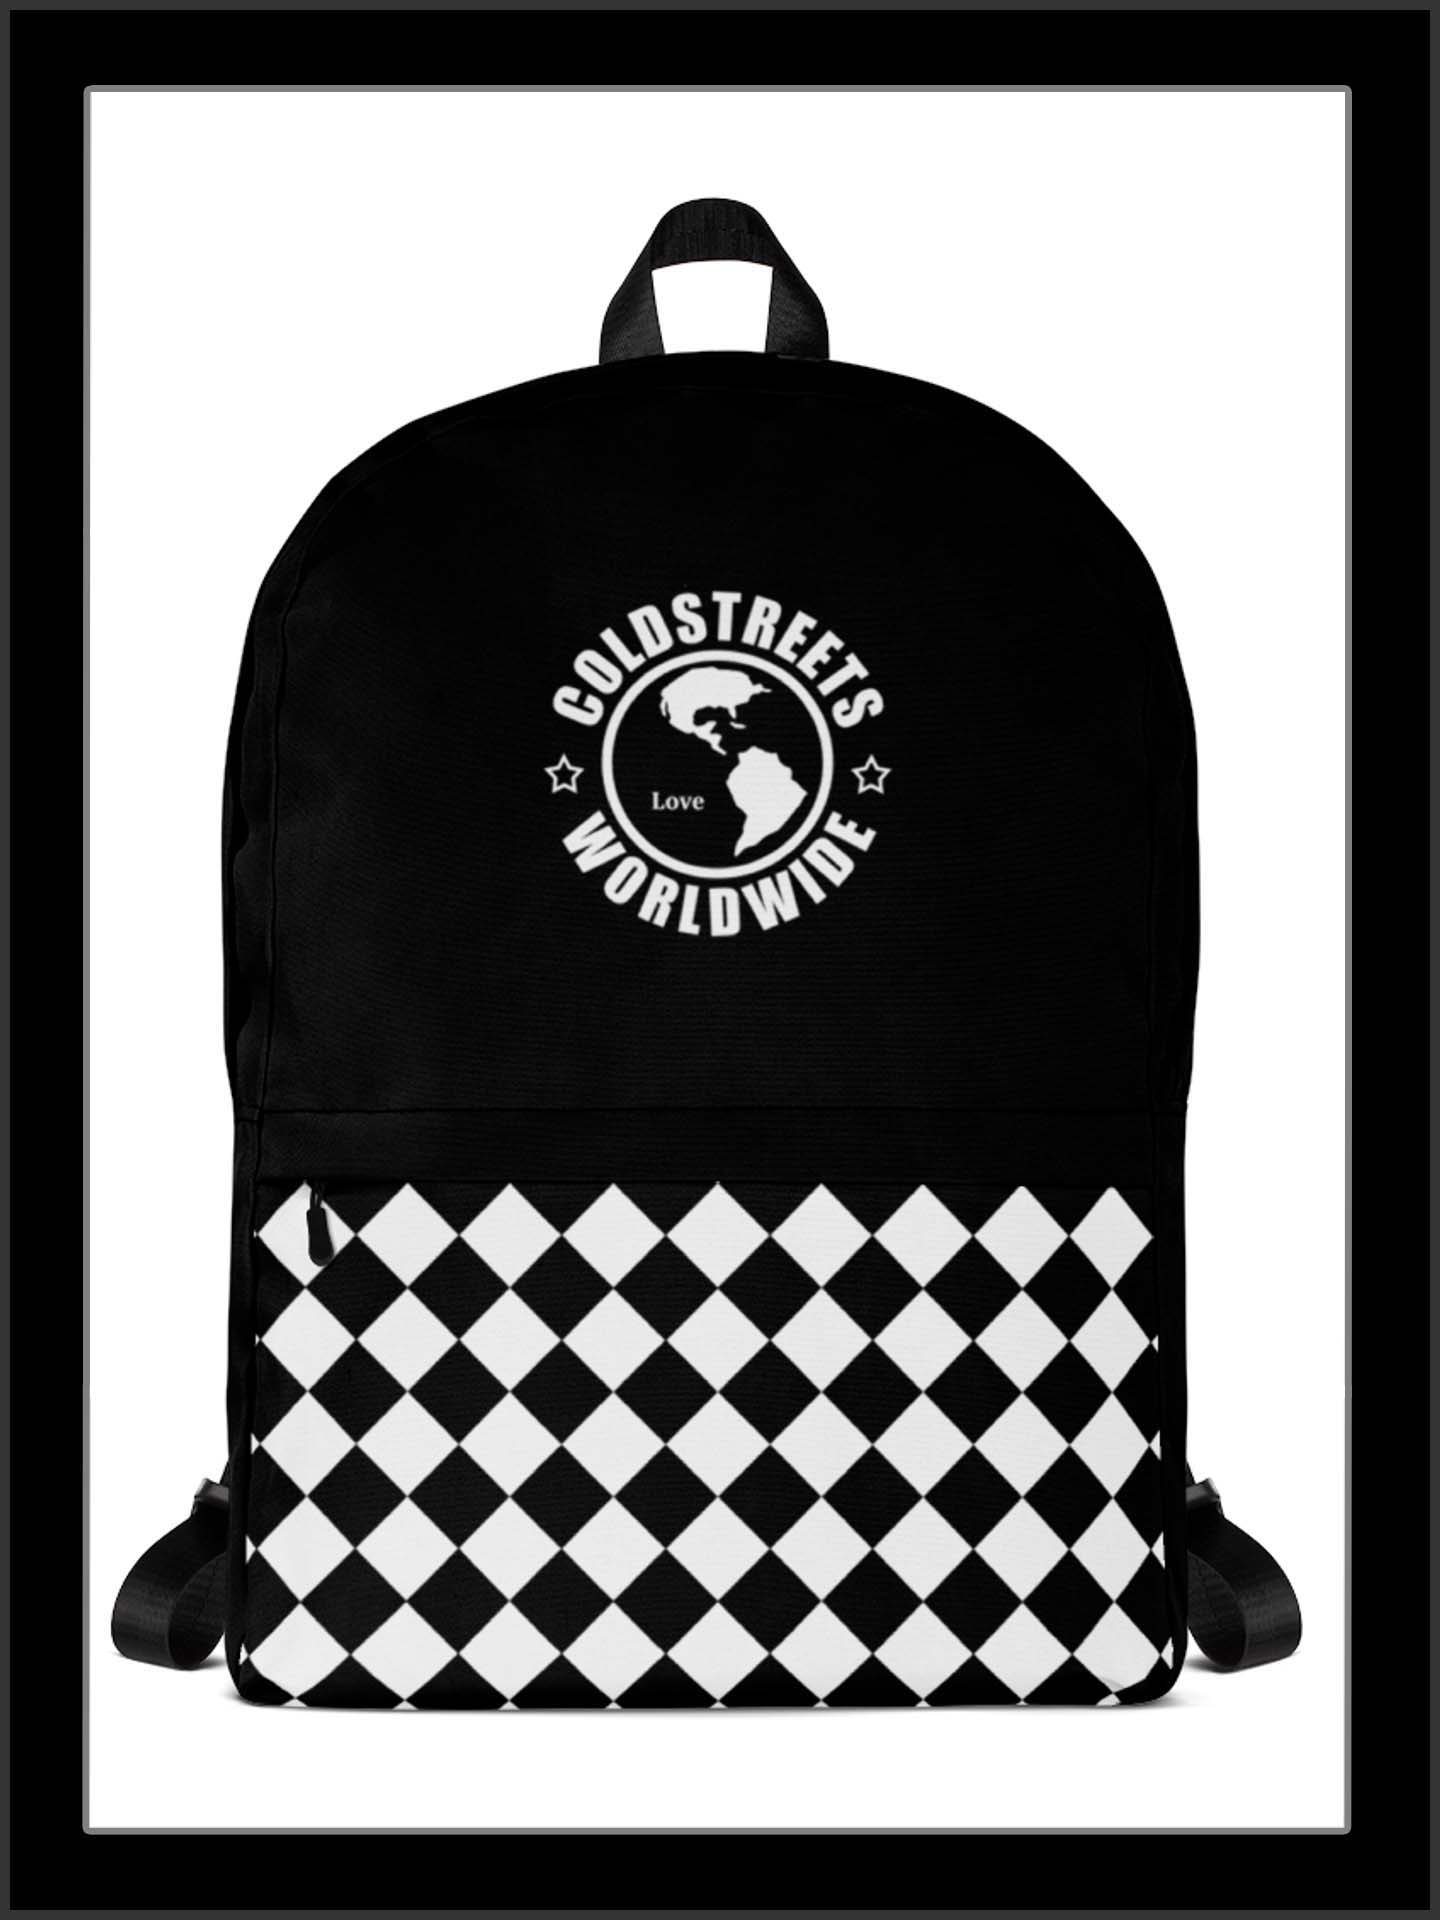 Cold Streets California Backpacks